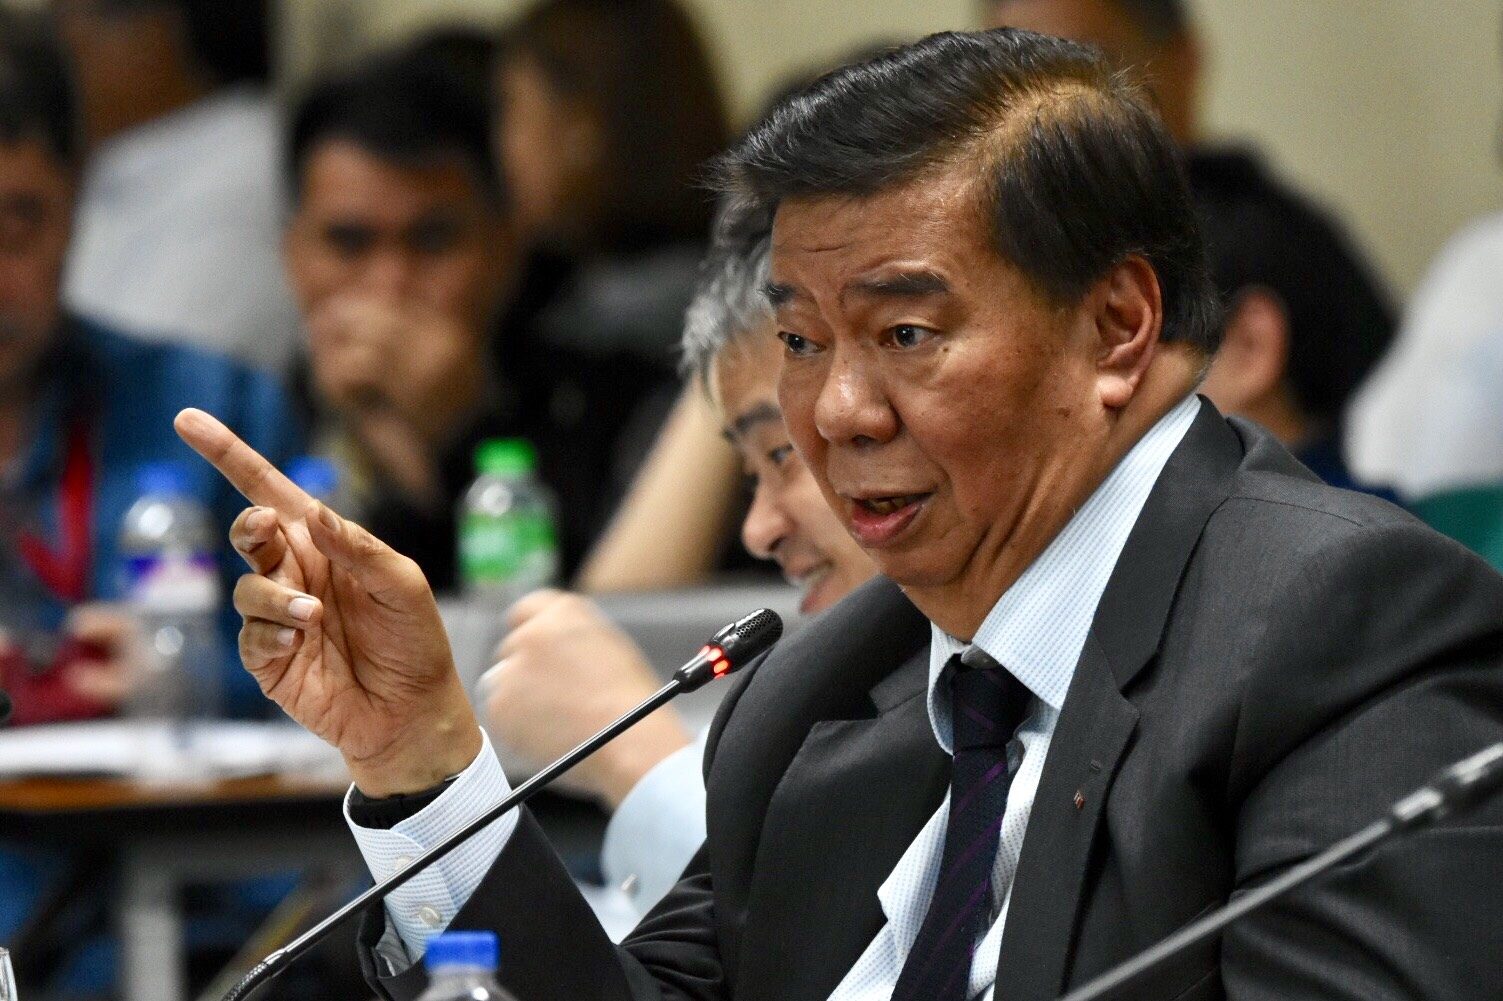 Drilon dares Malacañang: File charges vs LP members in Duterte ouster plot